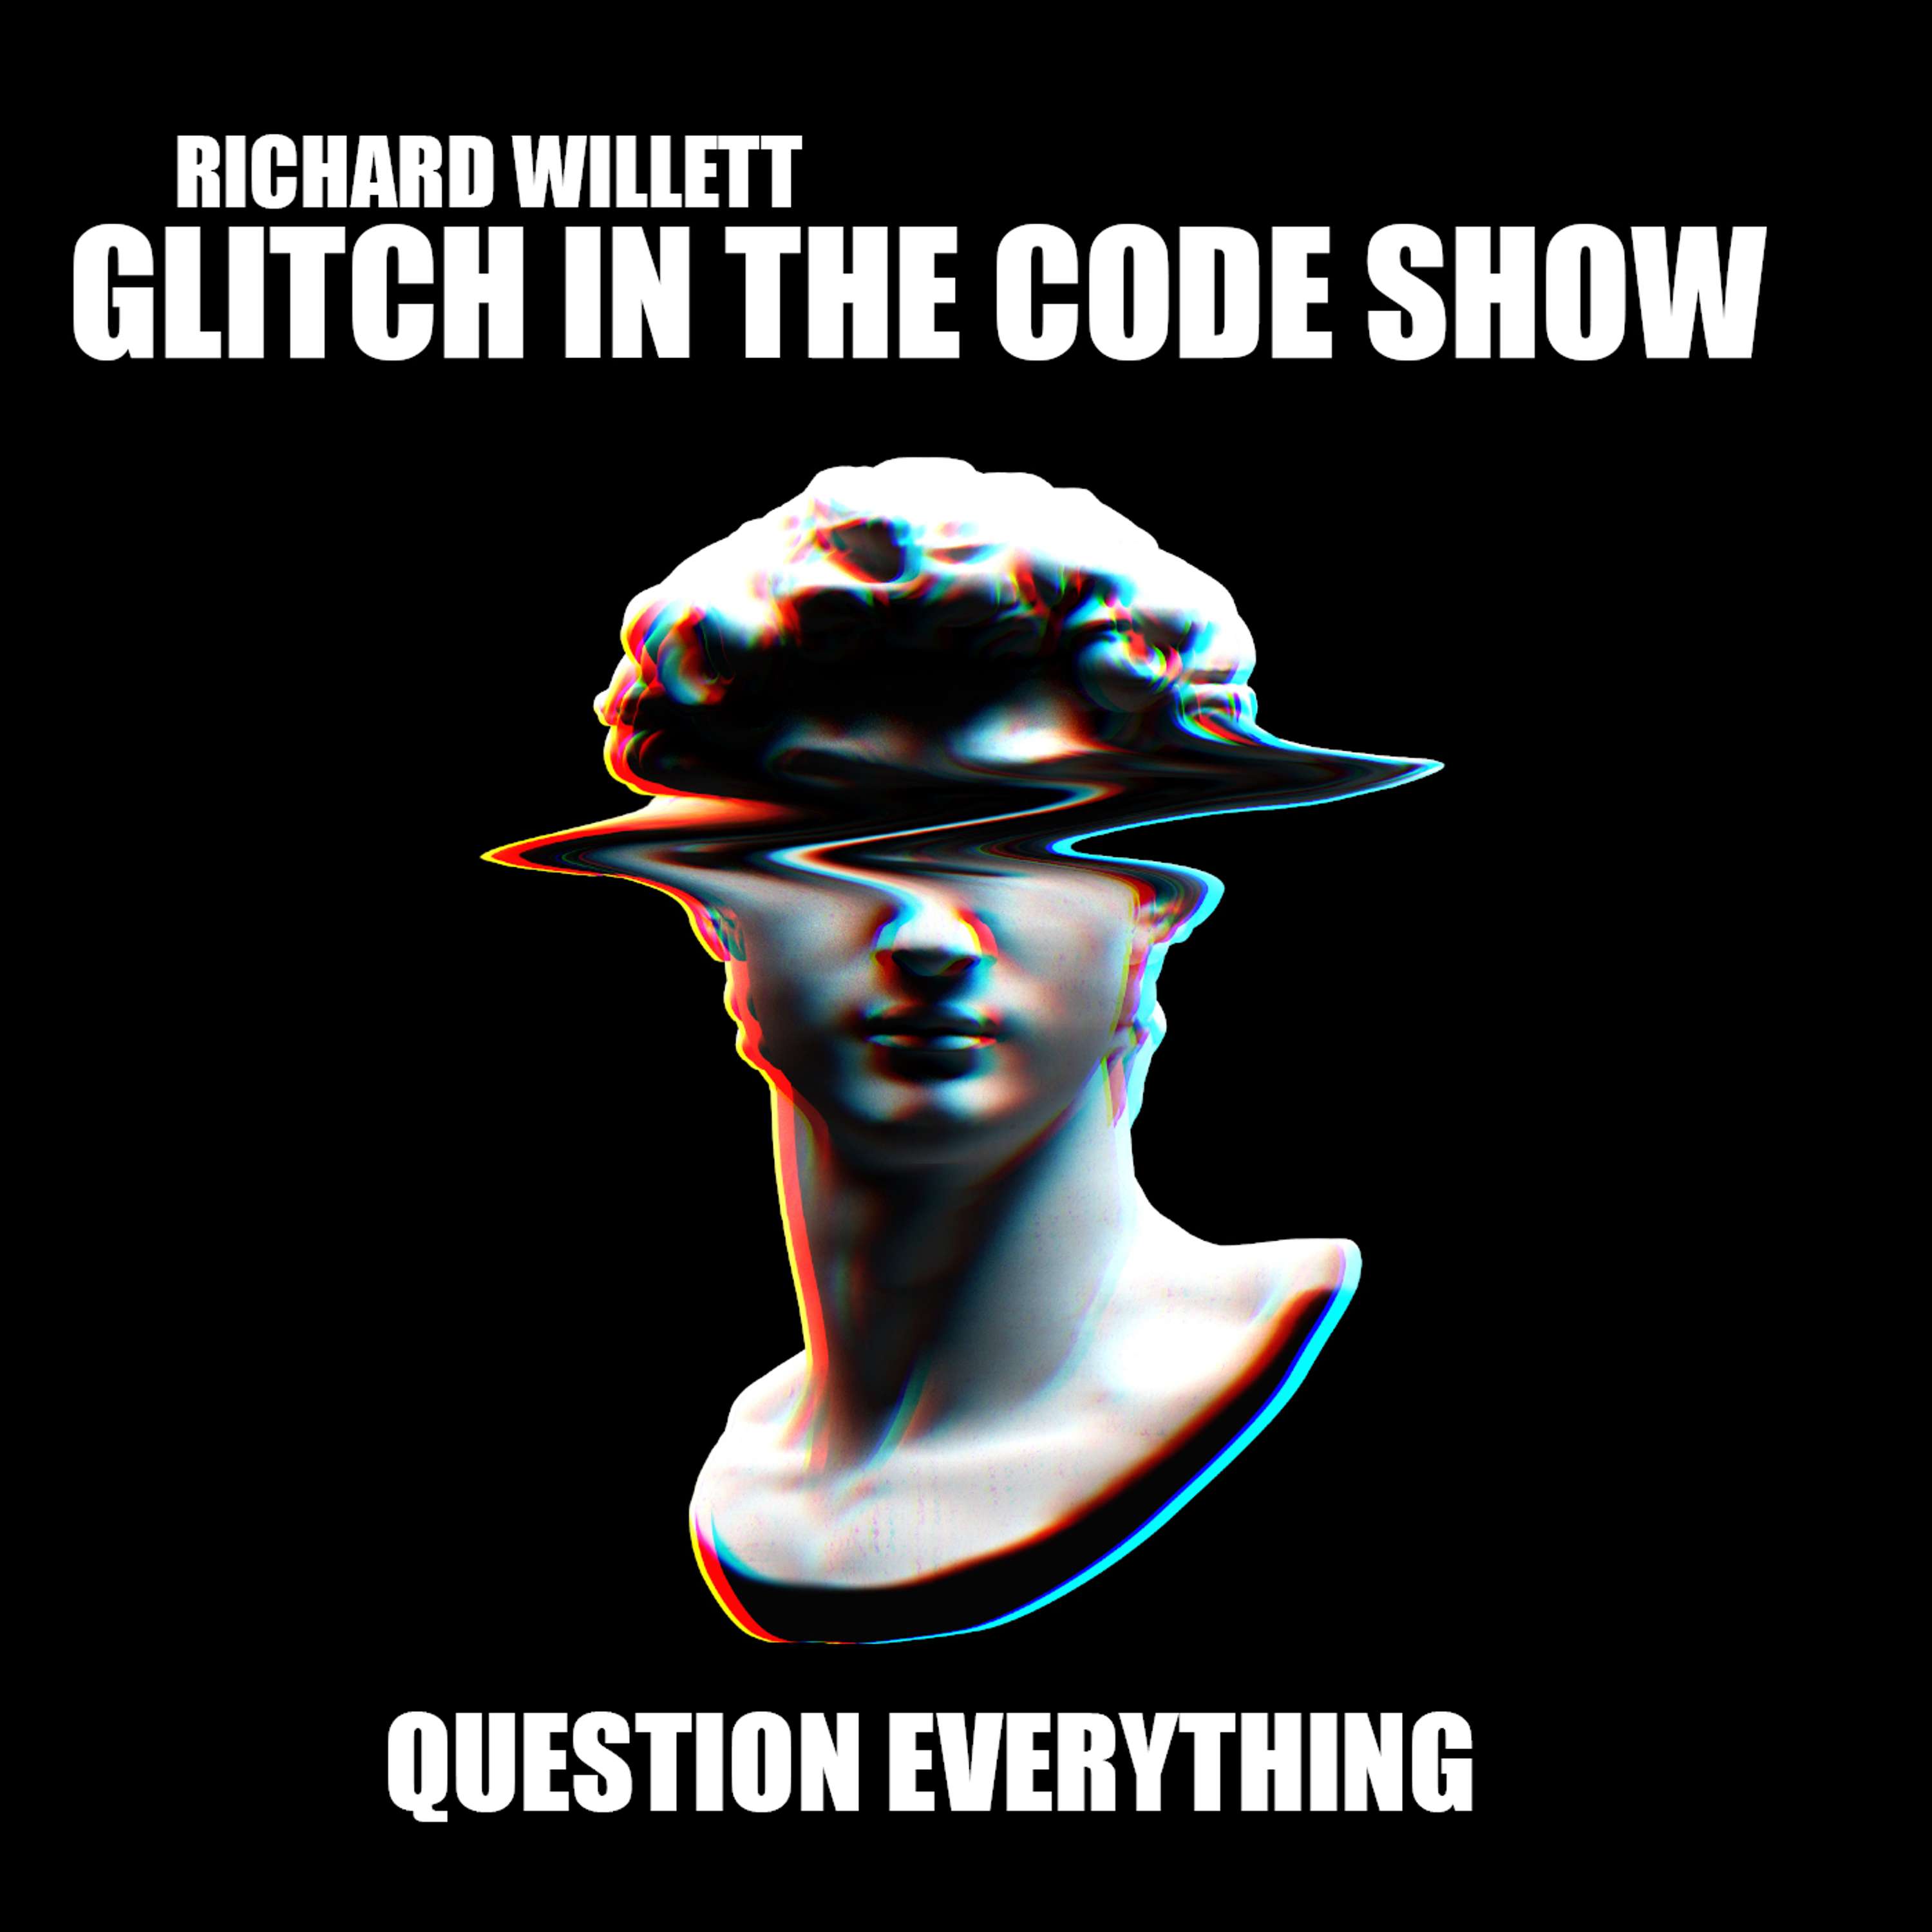 Glitch In The Code with Wayne Mcroy (The Plandemic & The Prophecies)Technocracy as a vehicle